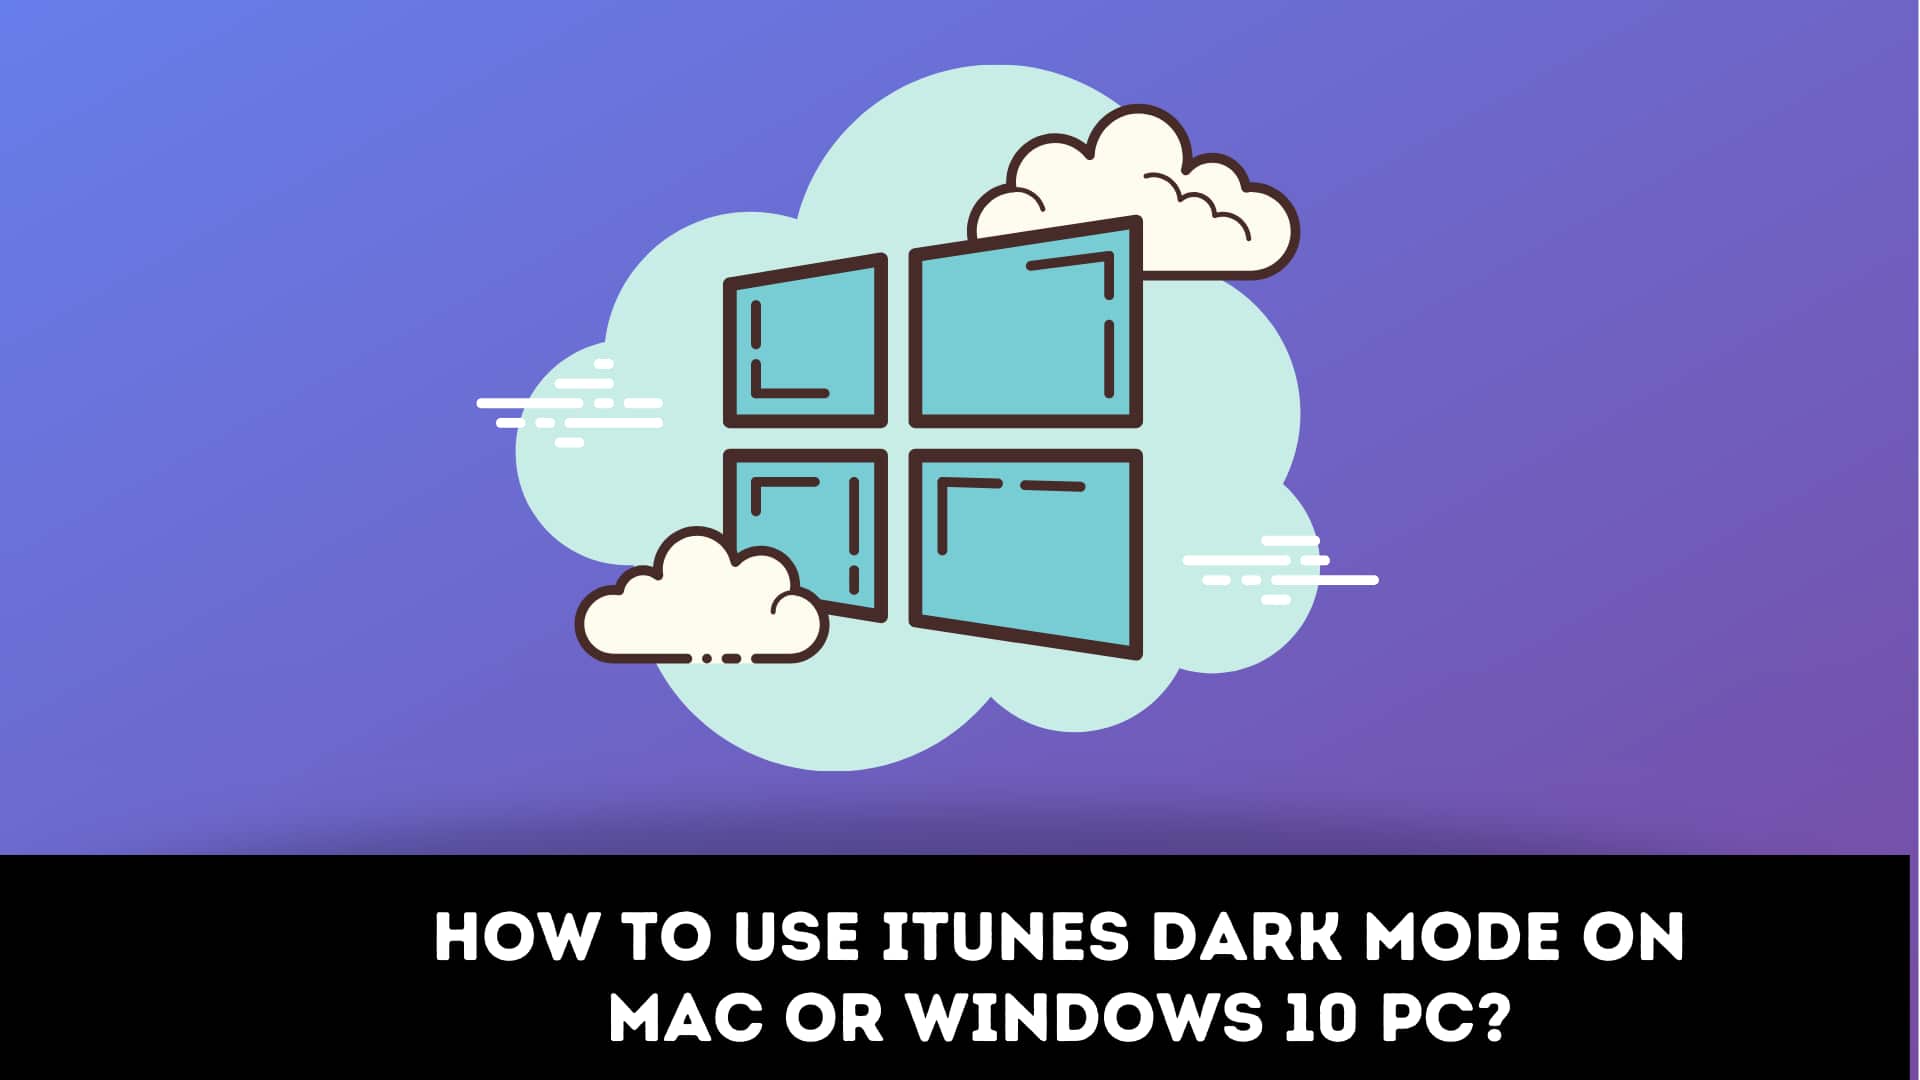 How to Use iTunes Dark Mode on Mac or Windows 10 PC?